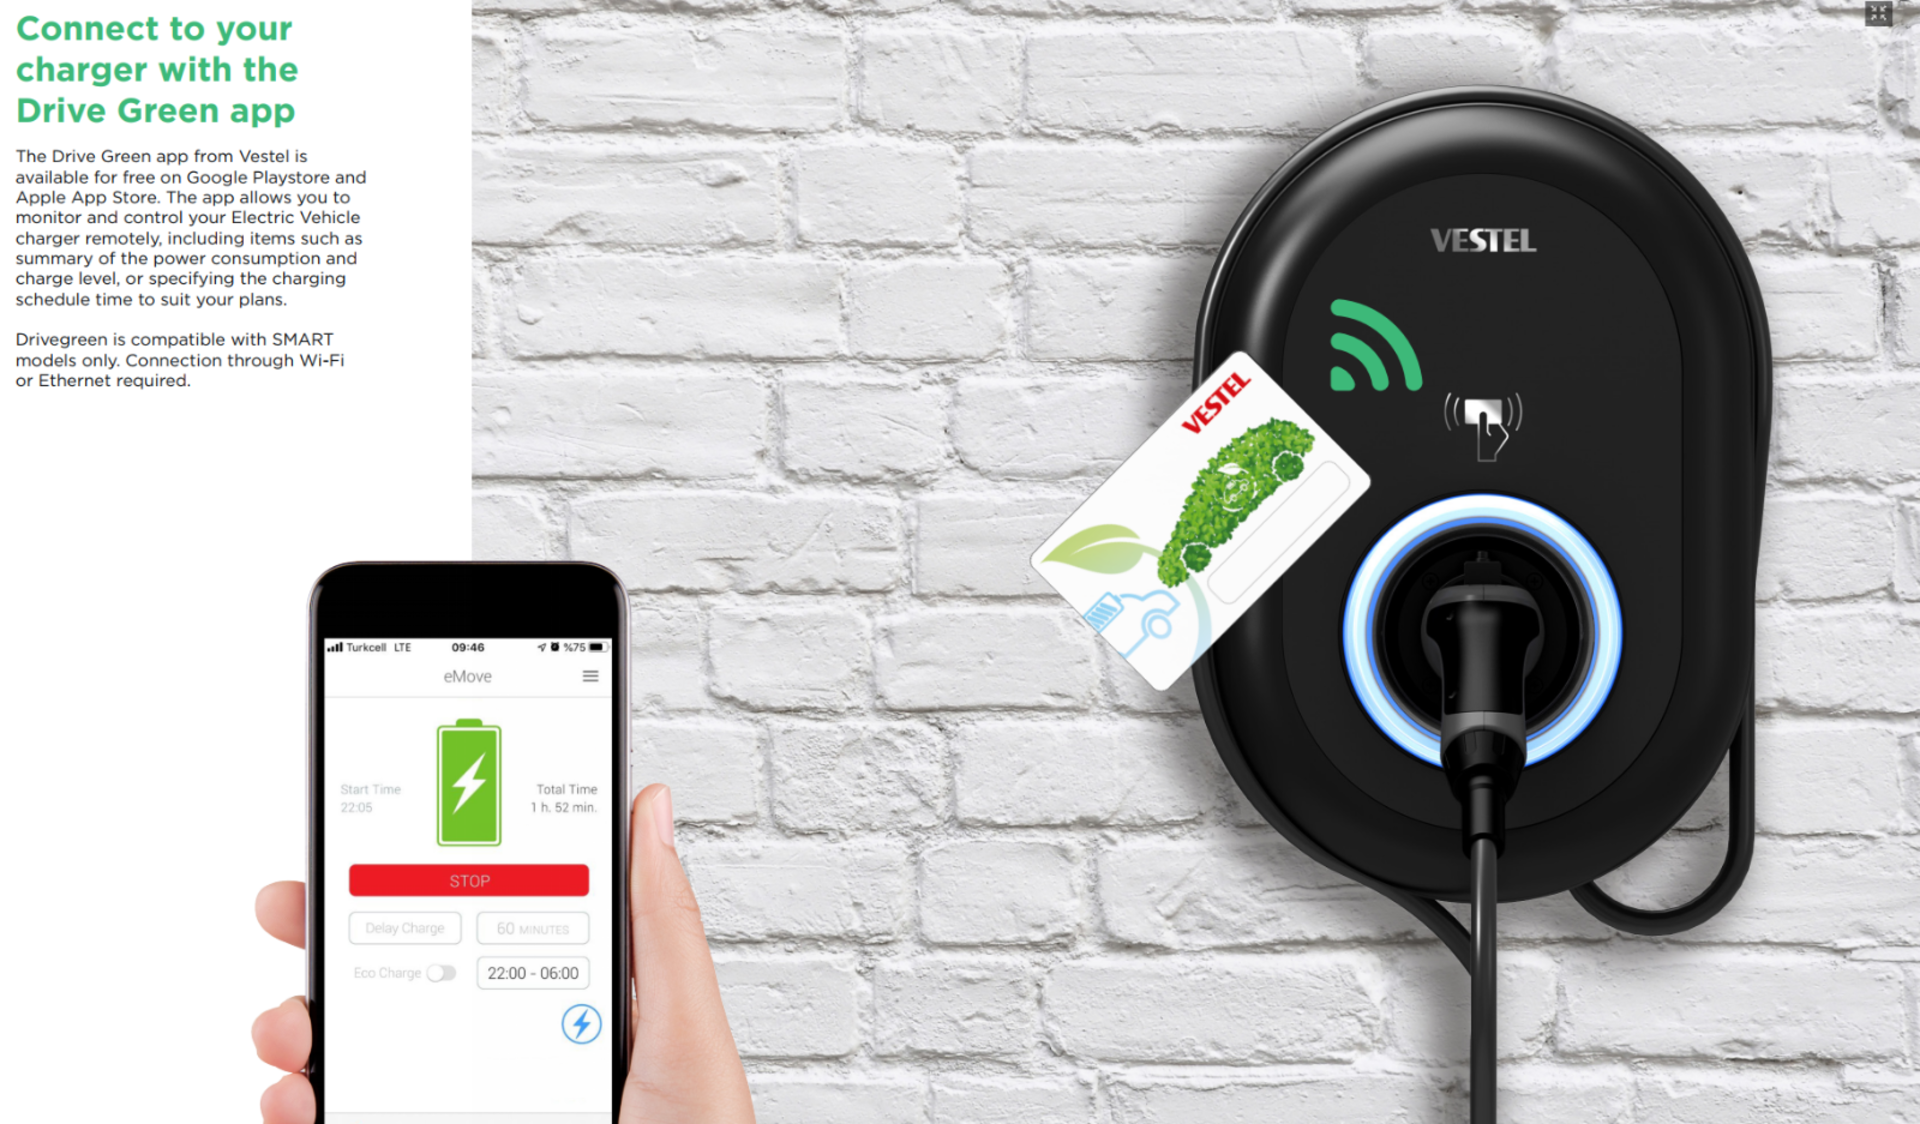 Vestel electric vehicle charger - Image 6 of 7